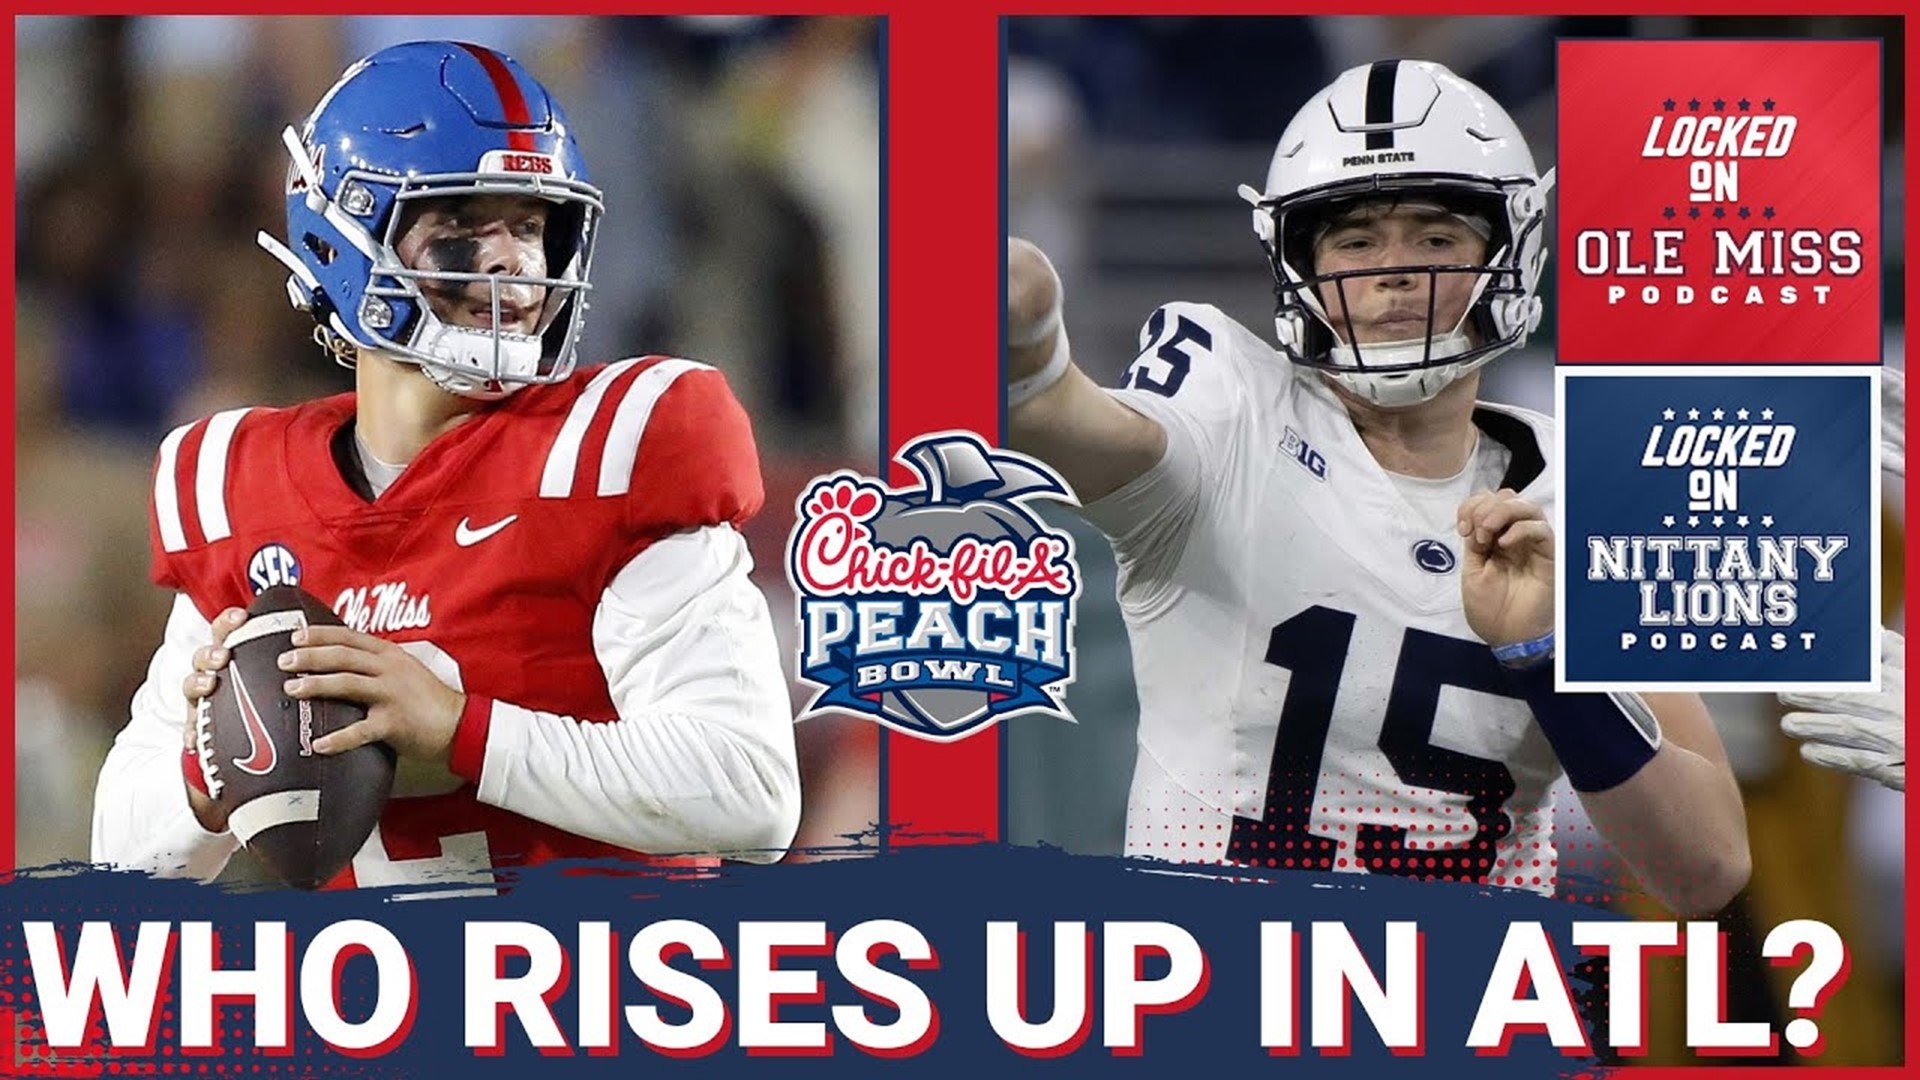 Today's Locked on Ole Miss podcast we talk about the Peach Bowl between the Ole Miss Rebels and the Penn State Nittany Lions.